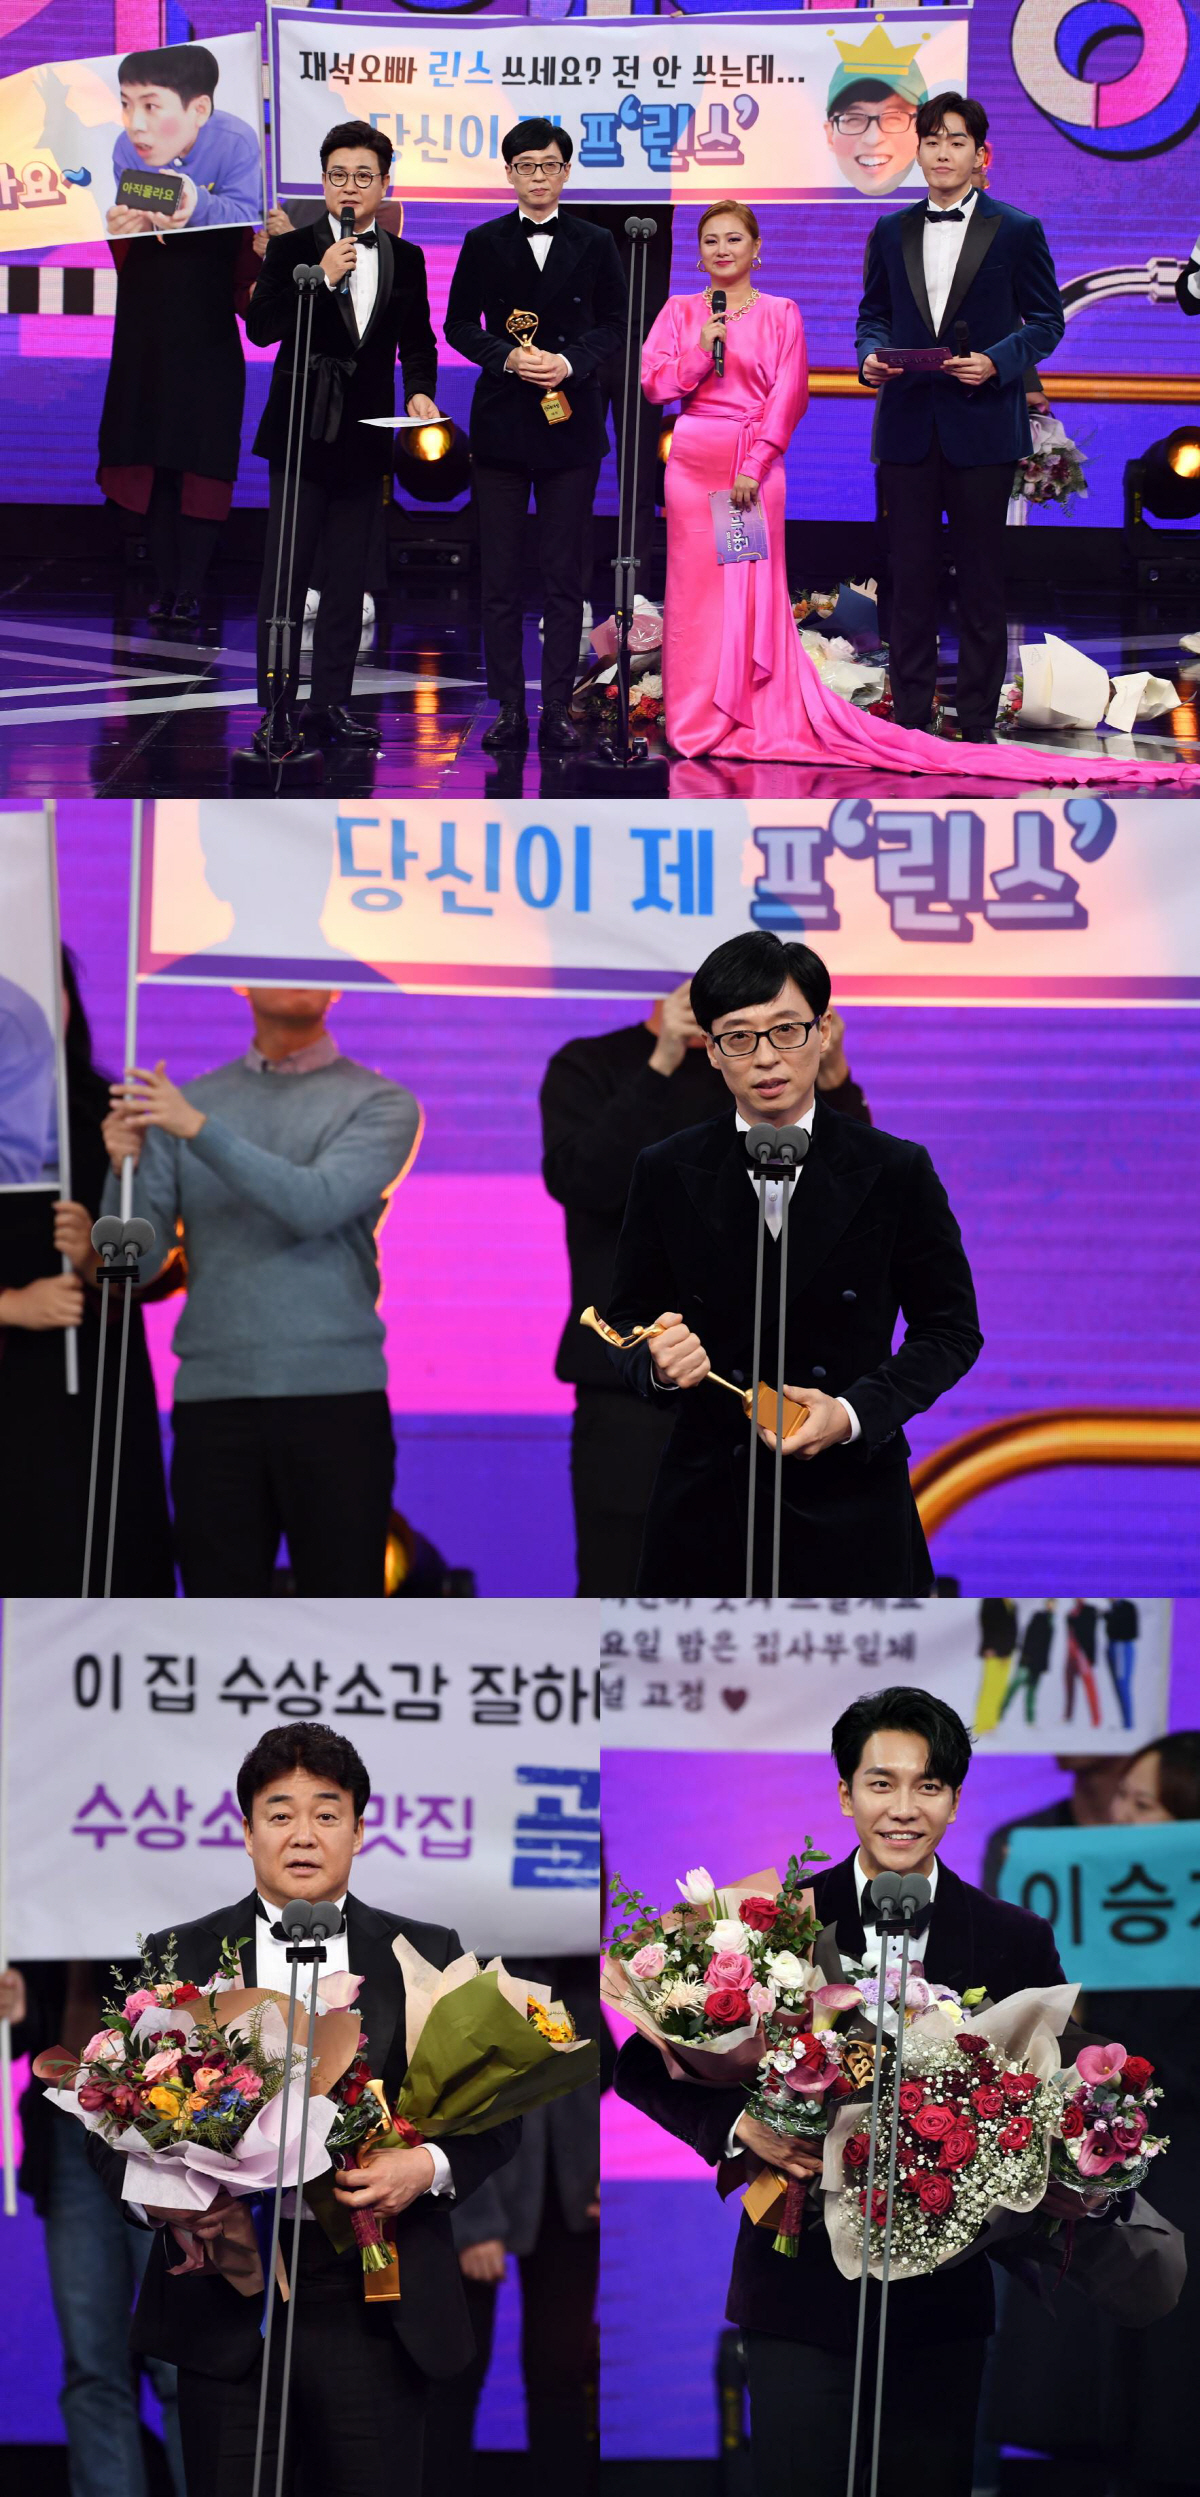 The 2019 SBS Entertainment Awards were won by Yoo Jae-Suk.The 2019 SBS Entertainment Grand Prize was held at the Sangam SBS Prism Tower in Mapo-gu, Seoul on the 28th.Kim Seong-joo, Park Narae, and announcer Cho Jung Sik were in charge of the proceedings.The 2019 SBS Entertainment Grand Prize was decorated with the concept of Newtro, and in addition to the awards, it provided a variety of attractions and entertainment including entertainment exhibition which looked back on SBSs entertainment history, and special stage of announcers who reenacted the stage of the 90s.In addition, Kim Jin and Kim Jung Hwa, Sun Woo Yong and Legend MC Joo Byung Jin, who played MC of SBS popular song in the 90s and 2000s, appeared as awards.The honor was awarded by Yoo Jae-Suk, who has been leading Running Man for nine years.Yoo Jae-Suk said, If you receive the grand prize, I want to receive it with the members of Running Man, but I am sorry to receive a big prize alone. Thank you to the members of Running Man who have been together for 10 years.I am grateful for the hard work I have made while relying on each other and sweating. I am sincerely grateful to many fans who save Running Man. The store entertainment variety is losing its place.Nevertheless, I am grateful to the many crew, members and guests who have been on the road together. Yoo Jae-Suk mourned the late Goo Hara and Sully, who had a relationship as a guest of Running Man, and said, I hope you two will do what you want to do in heaven.I think that these days are ordinary and comfortable, and I am grateful for my daily life.I am once again grateful for the sweat and effort of many people who have made me spend my precious daily life.  I do not know what I will show you next year, but I will work hard to pioneer the way that others do not go and make it a program that will create many new entertainers. Among the eight prominent candidates of Yoo Jae-Suk, Baek Jong-won, Shin Dong-yeop, Kim Jong-kook, Kim Gura, Kim Byung-man, Lee Seung-gi and Seo Jang-hoon, the moment when the head of Running Man, Yoo Jae-Suk, It took the best minute.The achievement award went to the Baek Jong-won of the Baek Jong-wons Alley Restaurant and Matnams Square; Baek Jong-won said, I dont know if I deserve this award.In addition to me, there are many people who have tried to give laughter and pleasure in the midst of hardship this year, and I will accept it as meaning to work harder. I will do my best to help the self-employed and farmers and fishermen suffering in the alley commercial area.I will try harder to see hope. On the other hand, Lee Seung-gi of Death and Deacon and Little Forest received the best prize, Kim Seong-joo, Choi Sung-guk, Kim Jong-kook, Hong Jin Young, and the excellence prize.In addition, this years Best Program Award was won by Baek Jong-wons Alley Restaurant, which has been steadily loved by viewers with high topic every time.On the other hand, the broadcast ranked first in the same time zone with 8.5% of the first part and 13.1% of the second part (hereinafter based on Nielsen Korea and the metropolitan area).2049 Target ratings was 5.1%, and the moment when Yoo Jae-Suk was called the grand prize winner, the audience rating per minute rose to 16.7%.